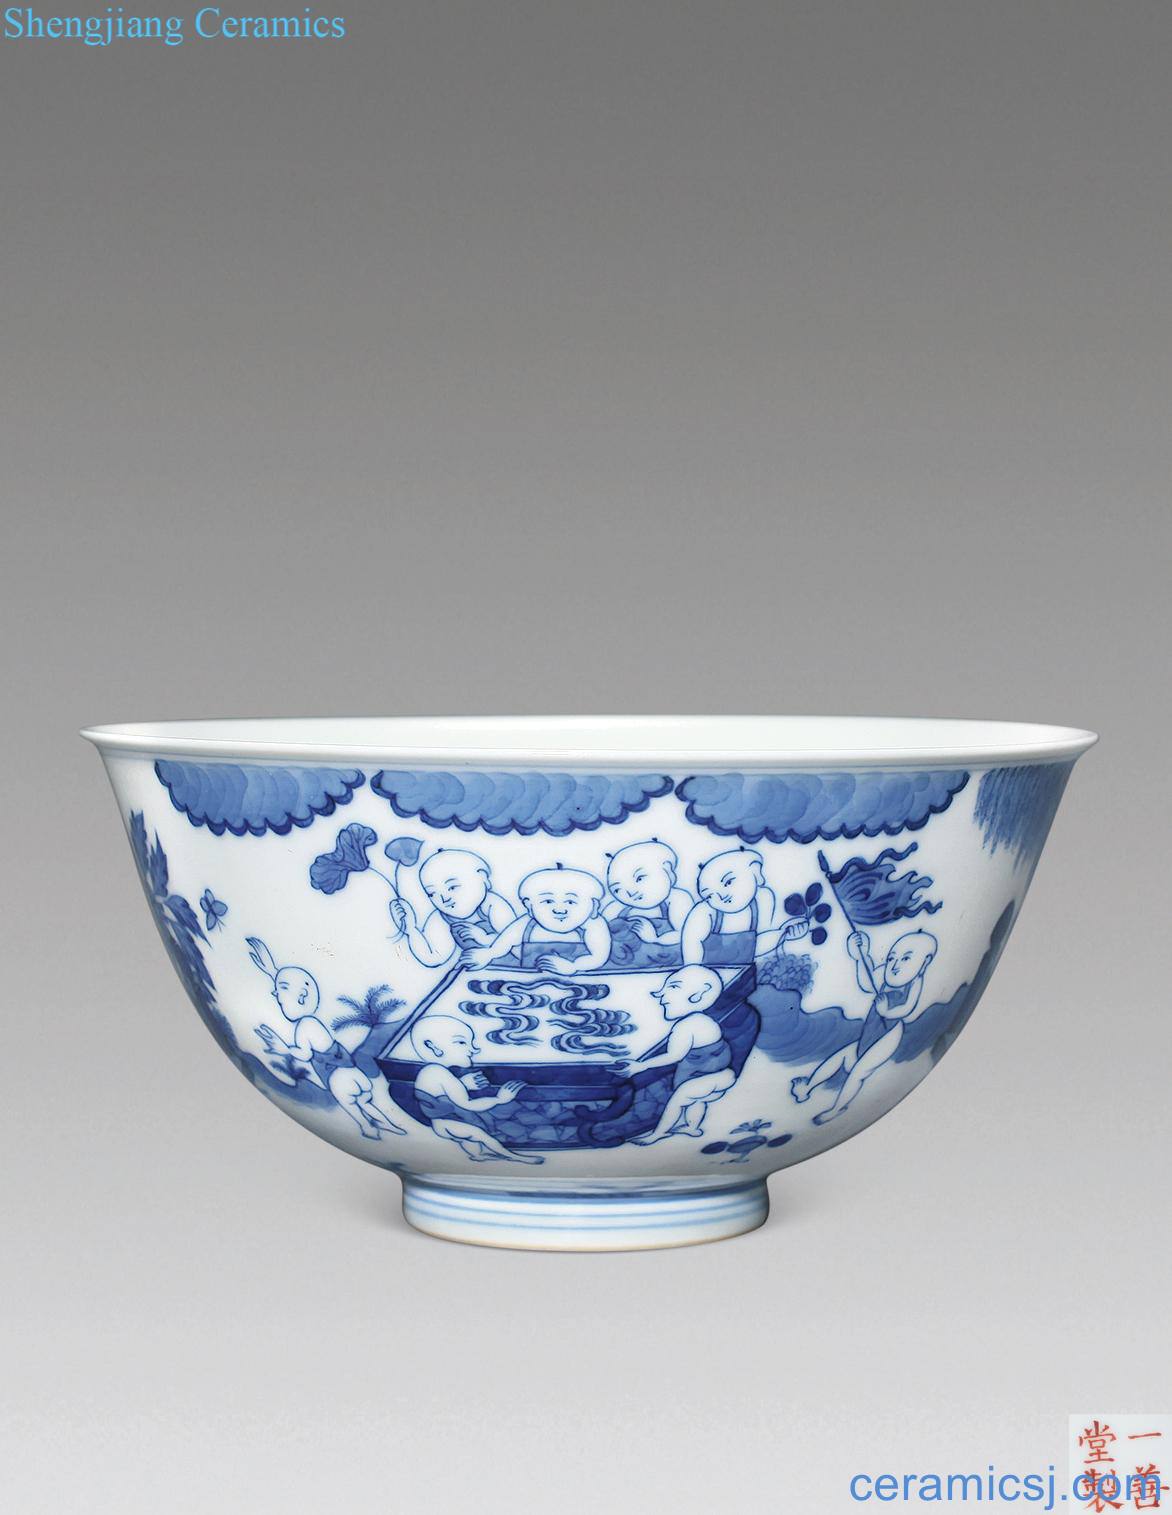 Qing dynasty blue-and-white 16 bowl